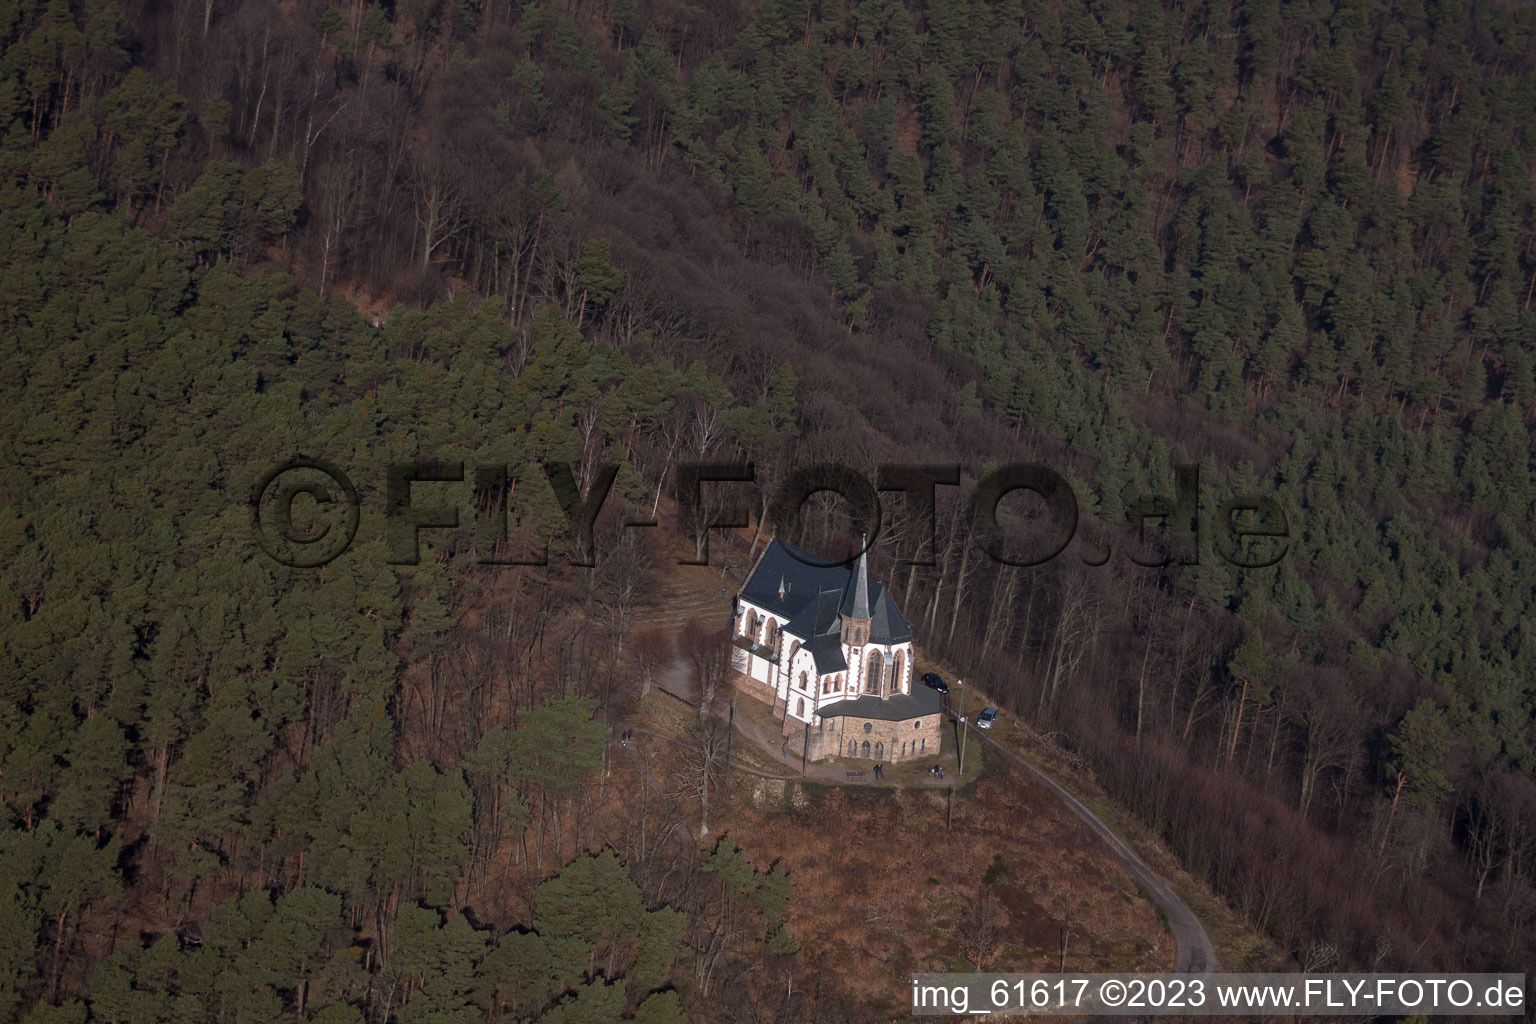 Anna Chapel in Burrweiler in the state Rhineland-Palatinate, Germany seen from a drone